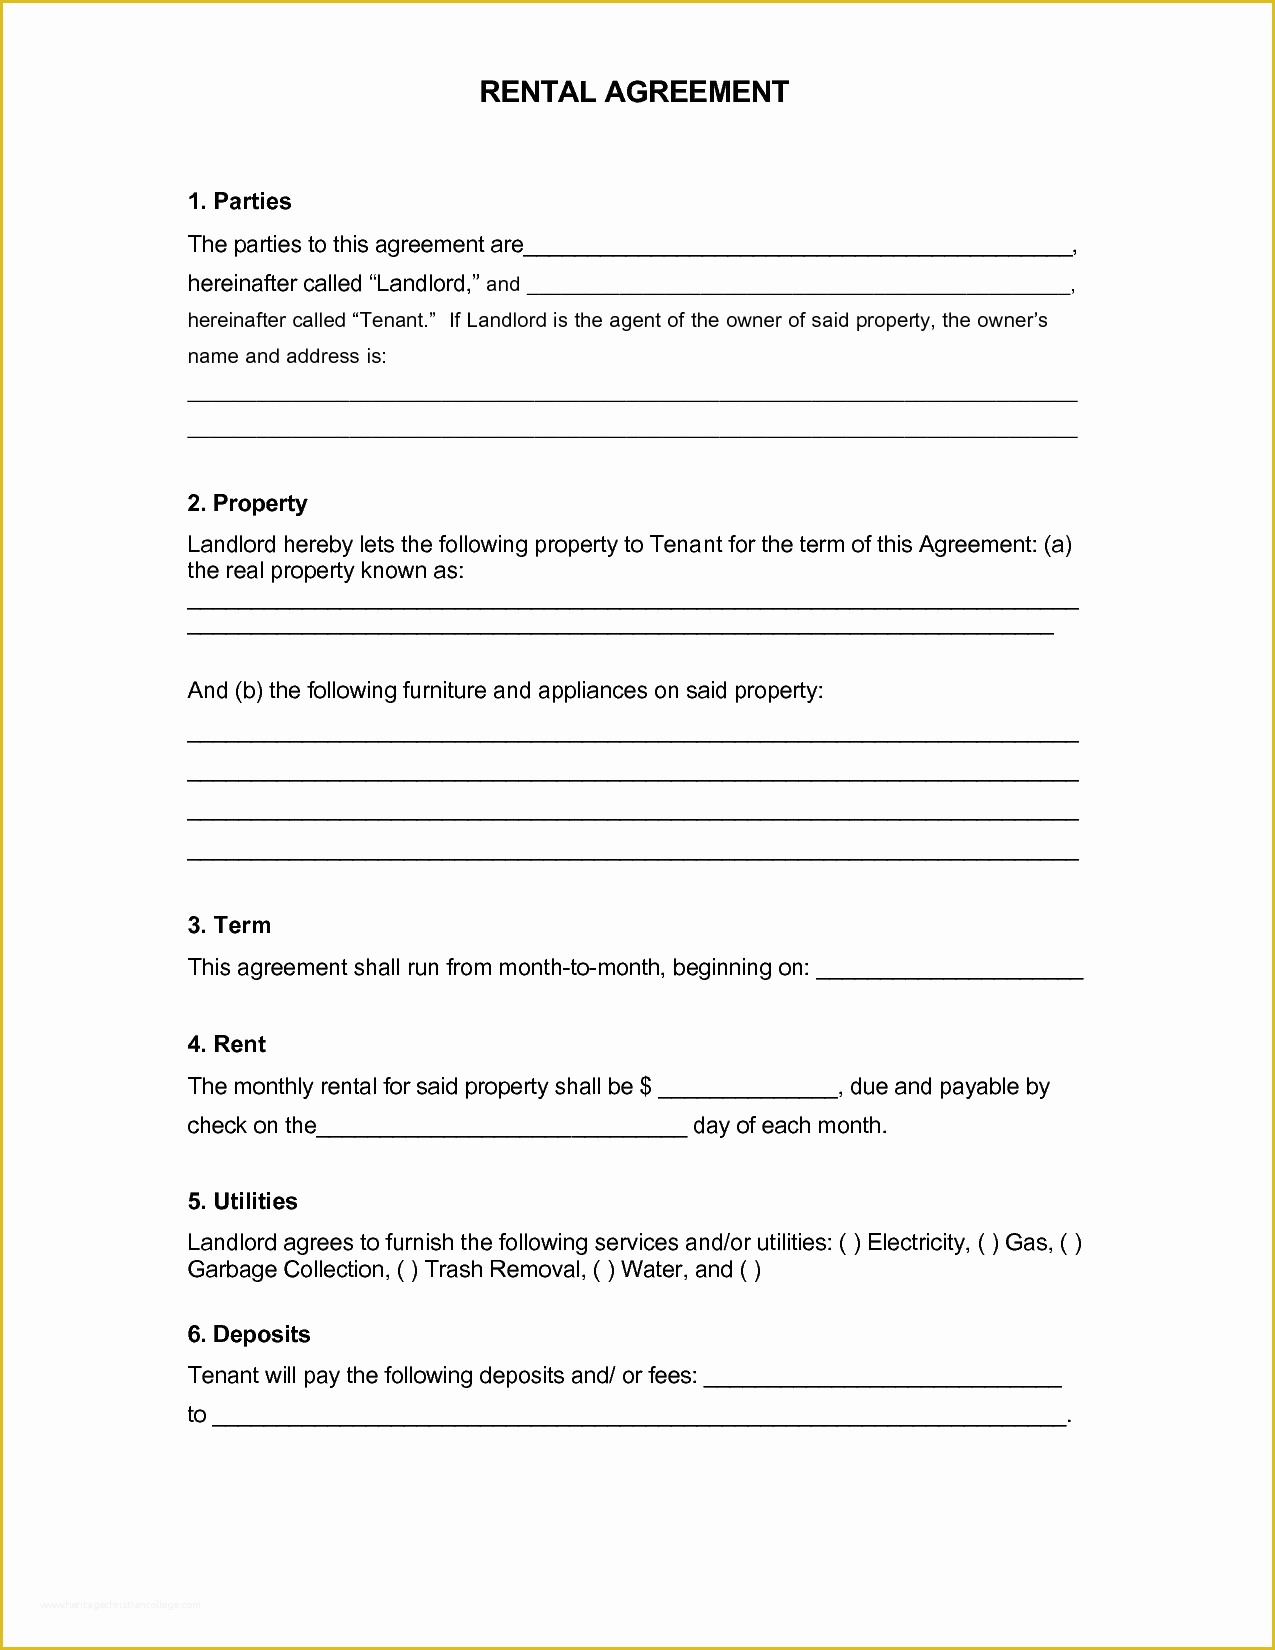 Free Residential Lease Agreement Template Ohio Of Rental Agreement Template Free Printable Documents